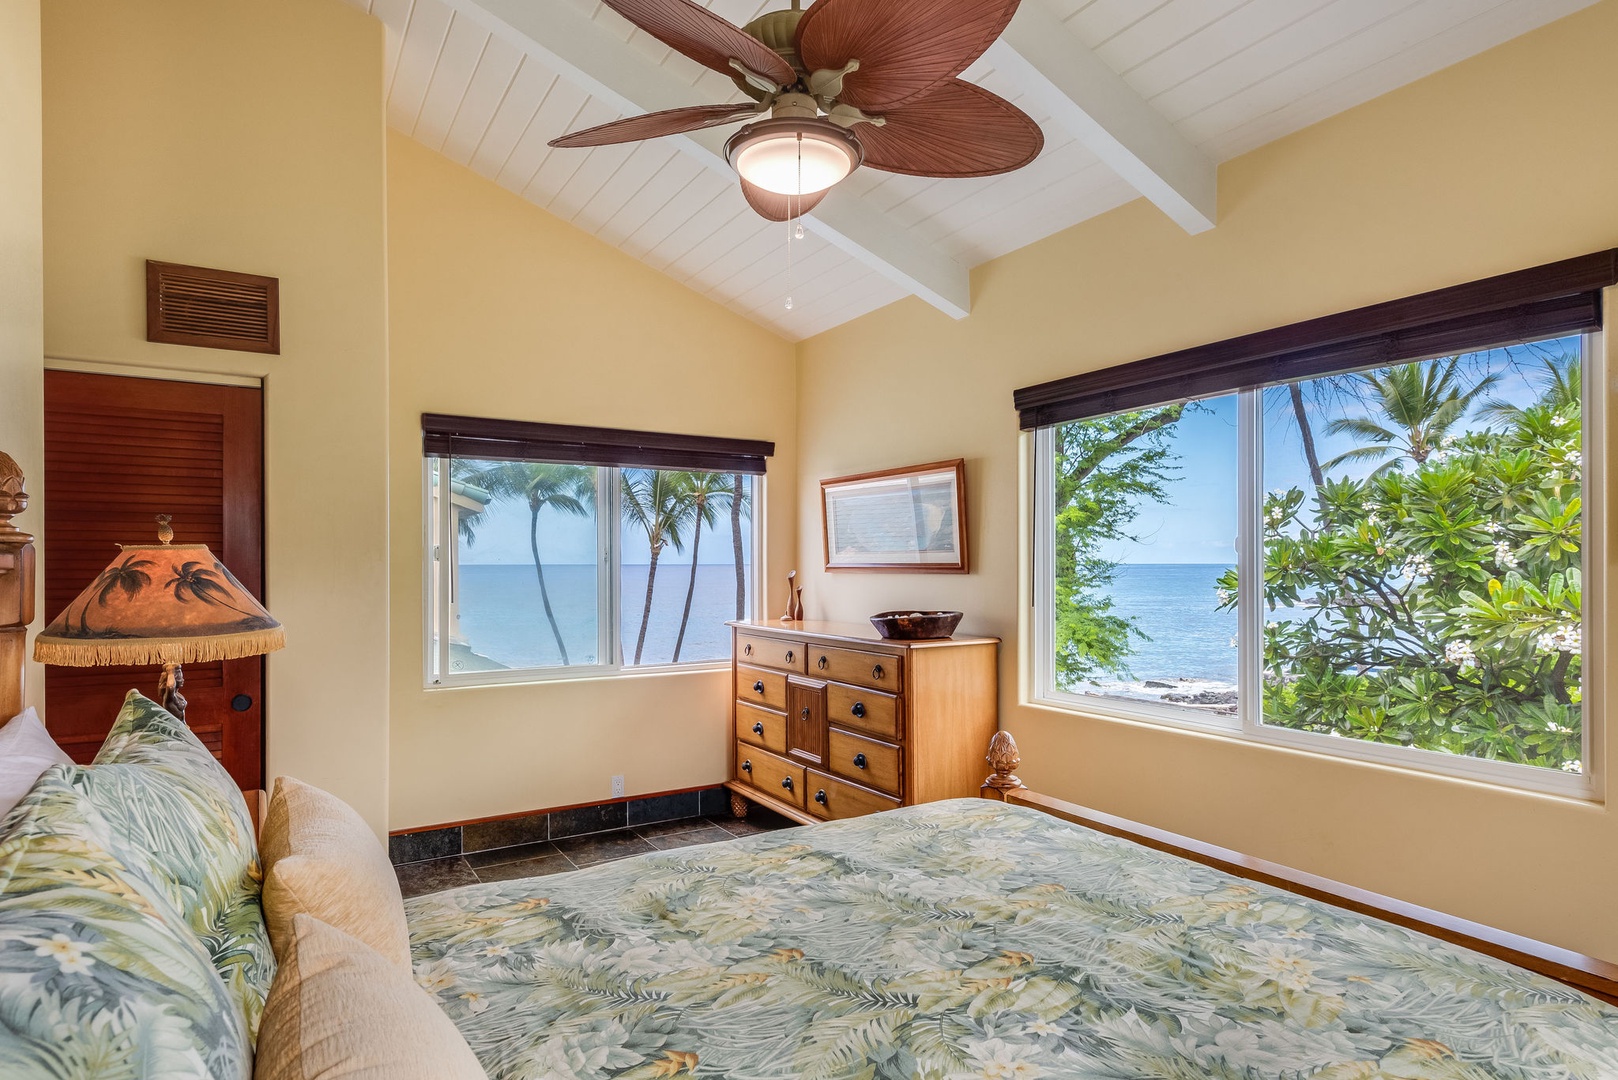 Kailua Kona Vacation Rentals, Kona Beach Bungalows** - Revel in the Moana Hale Upstairs Queen room, where panoramic vistas frame your every morning.